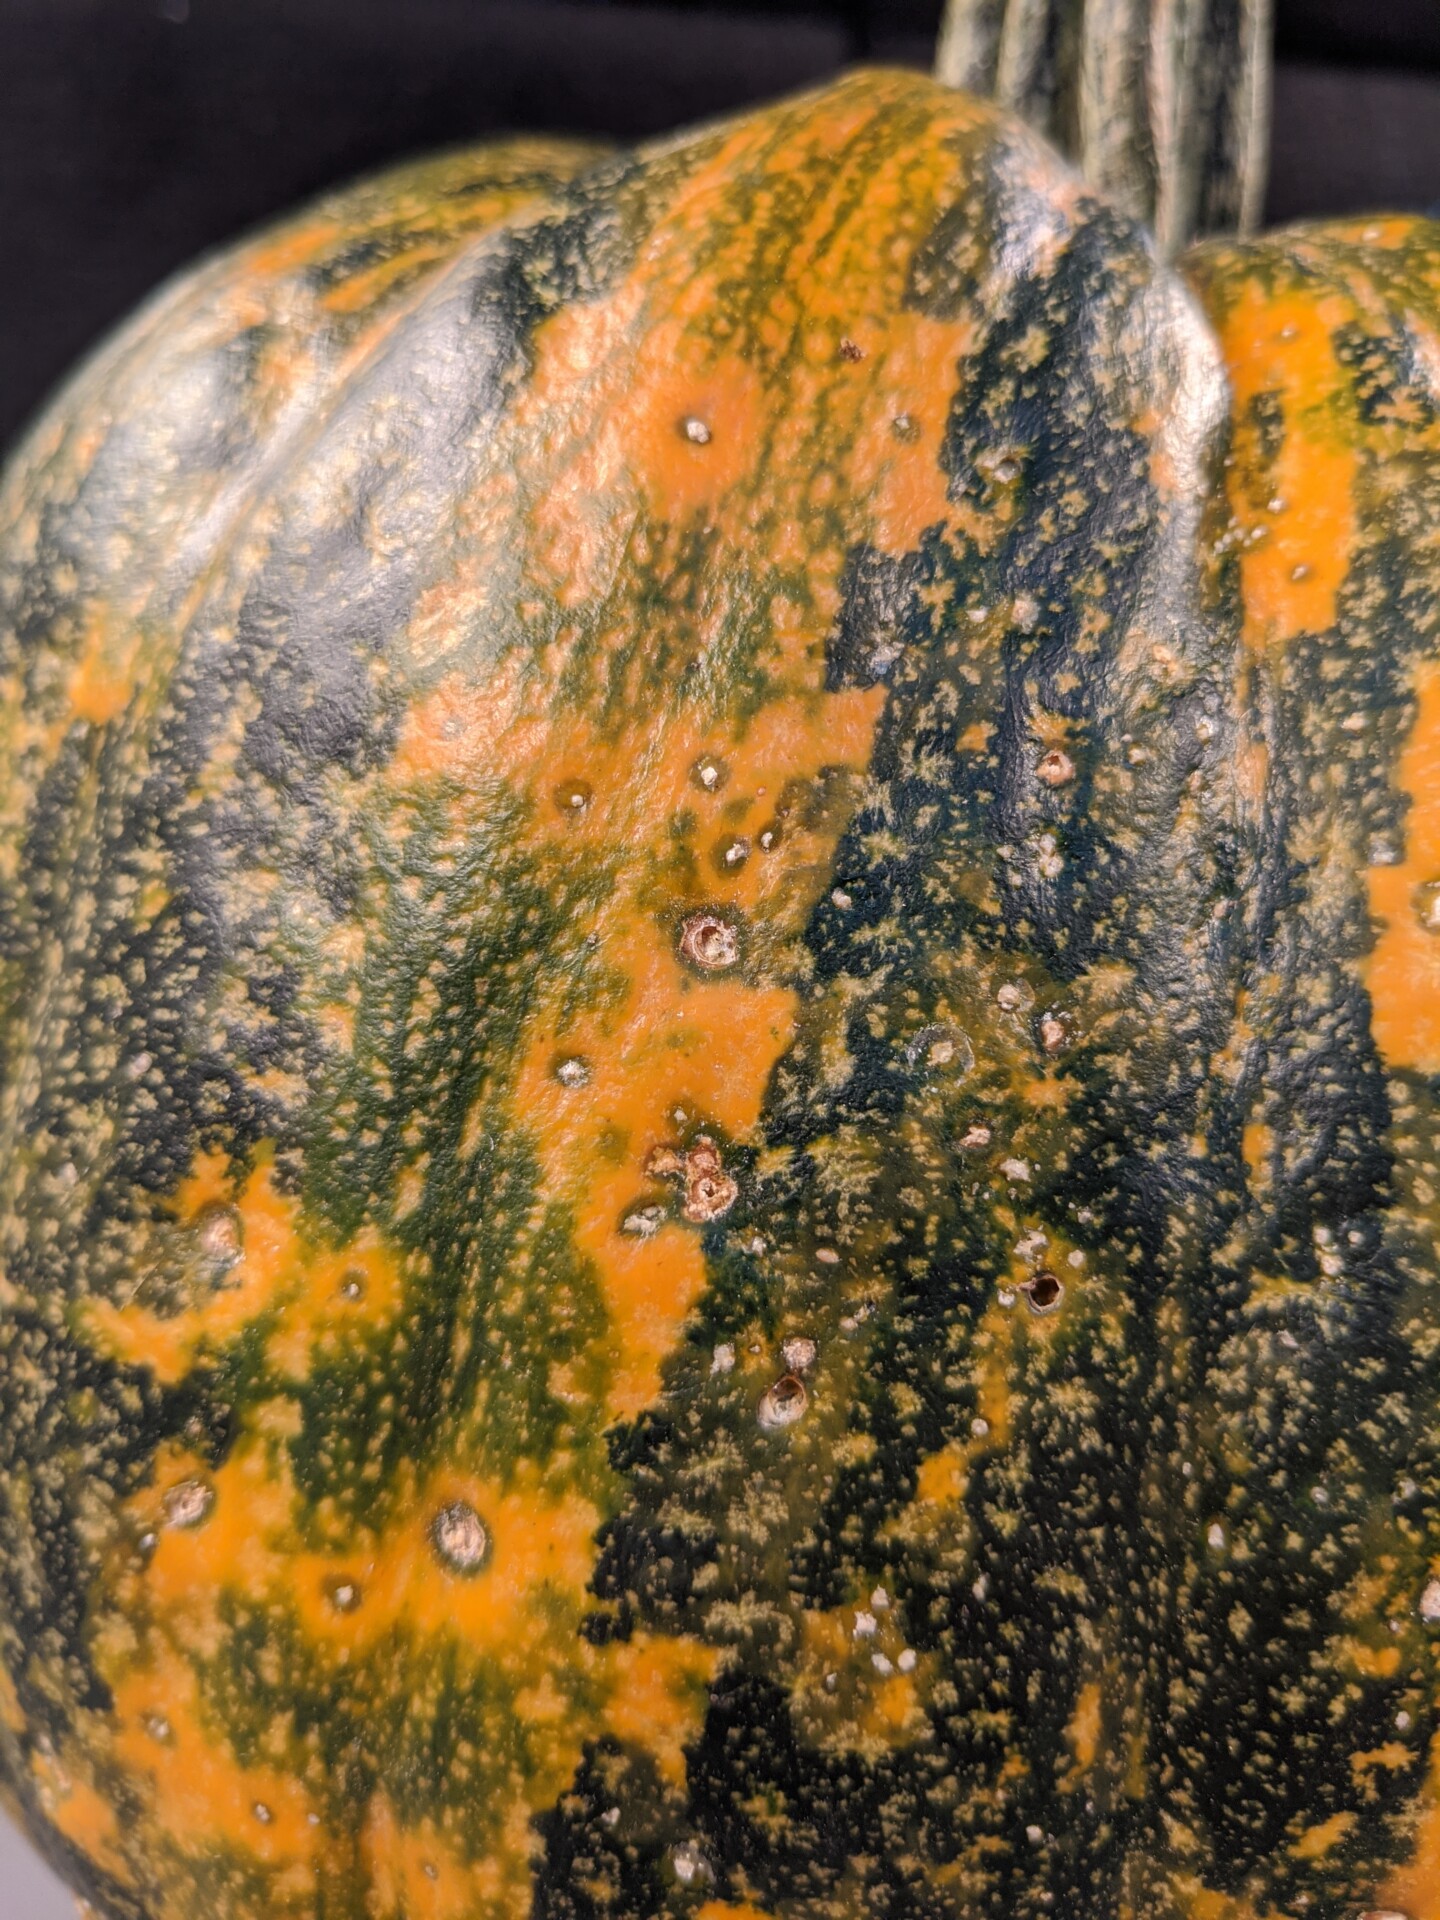 Lesions of bacterial spot on this pumpkin appear necrotic and may have small depressions in the center.